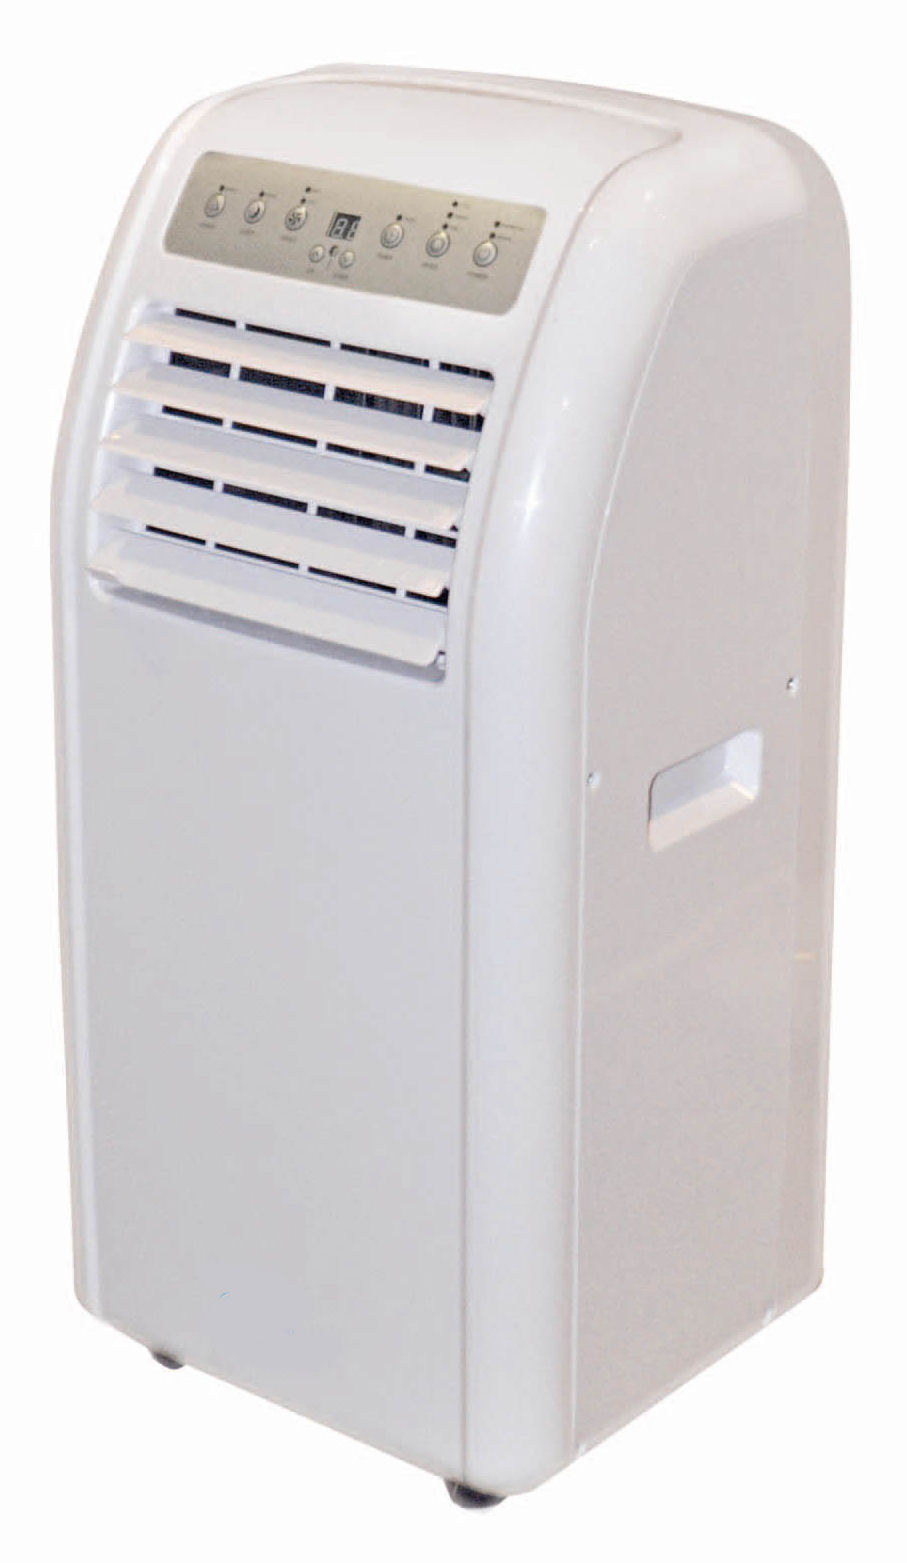 Air Conditioning Rental Kensington - Chilly Pepper Hire